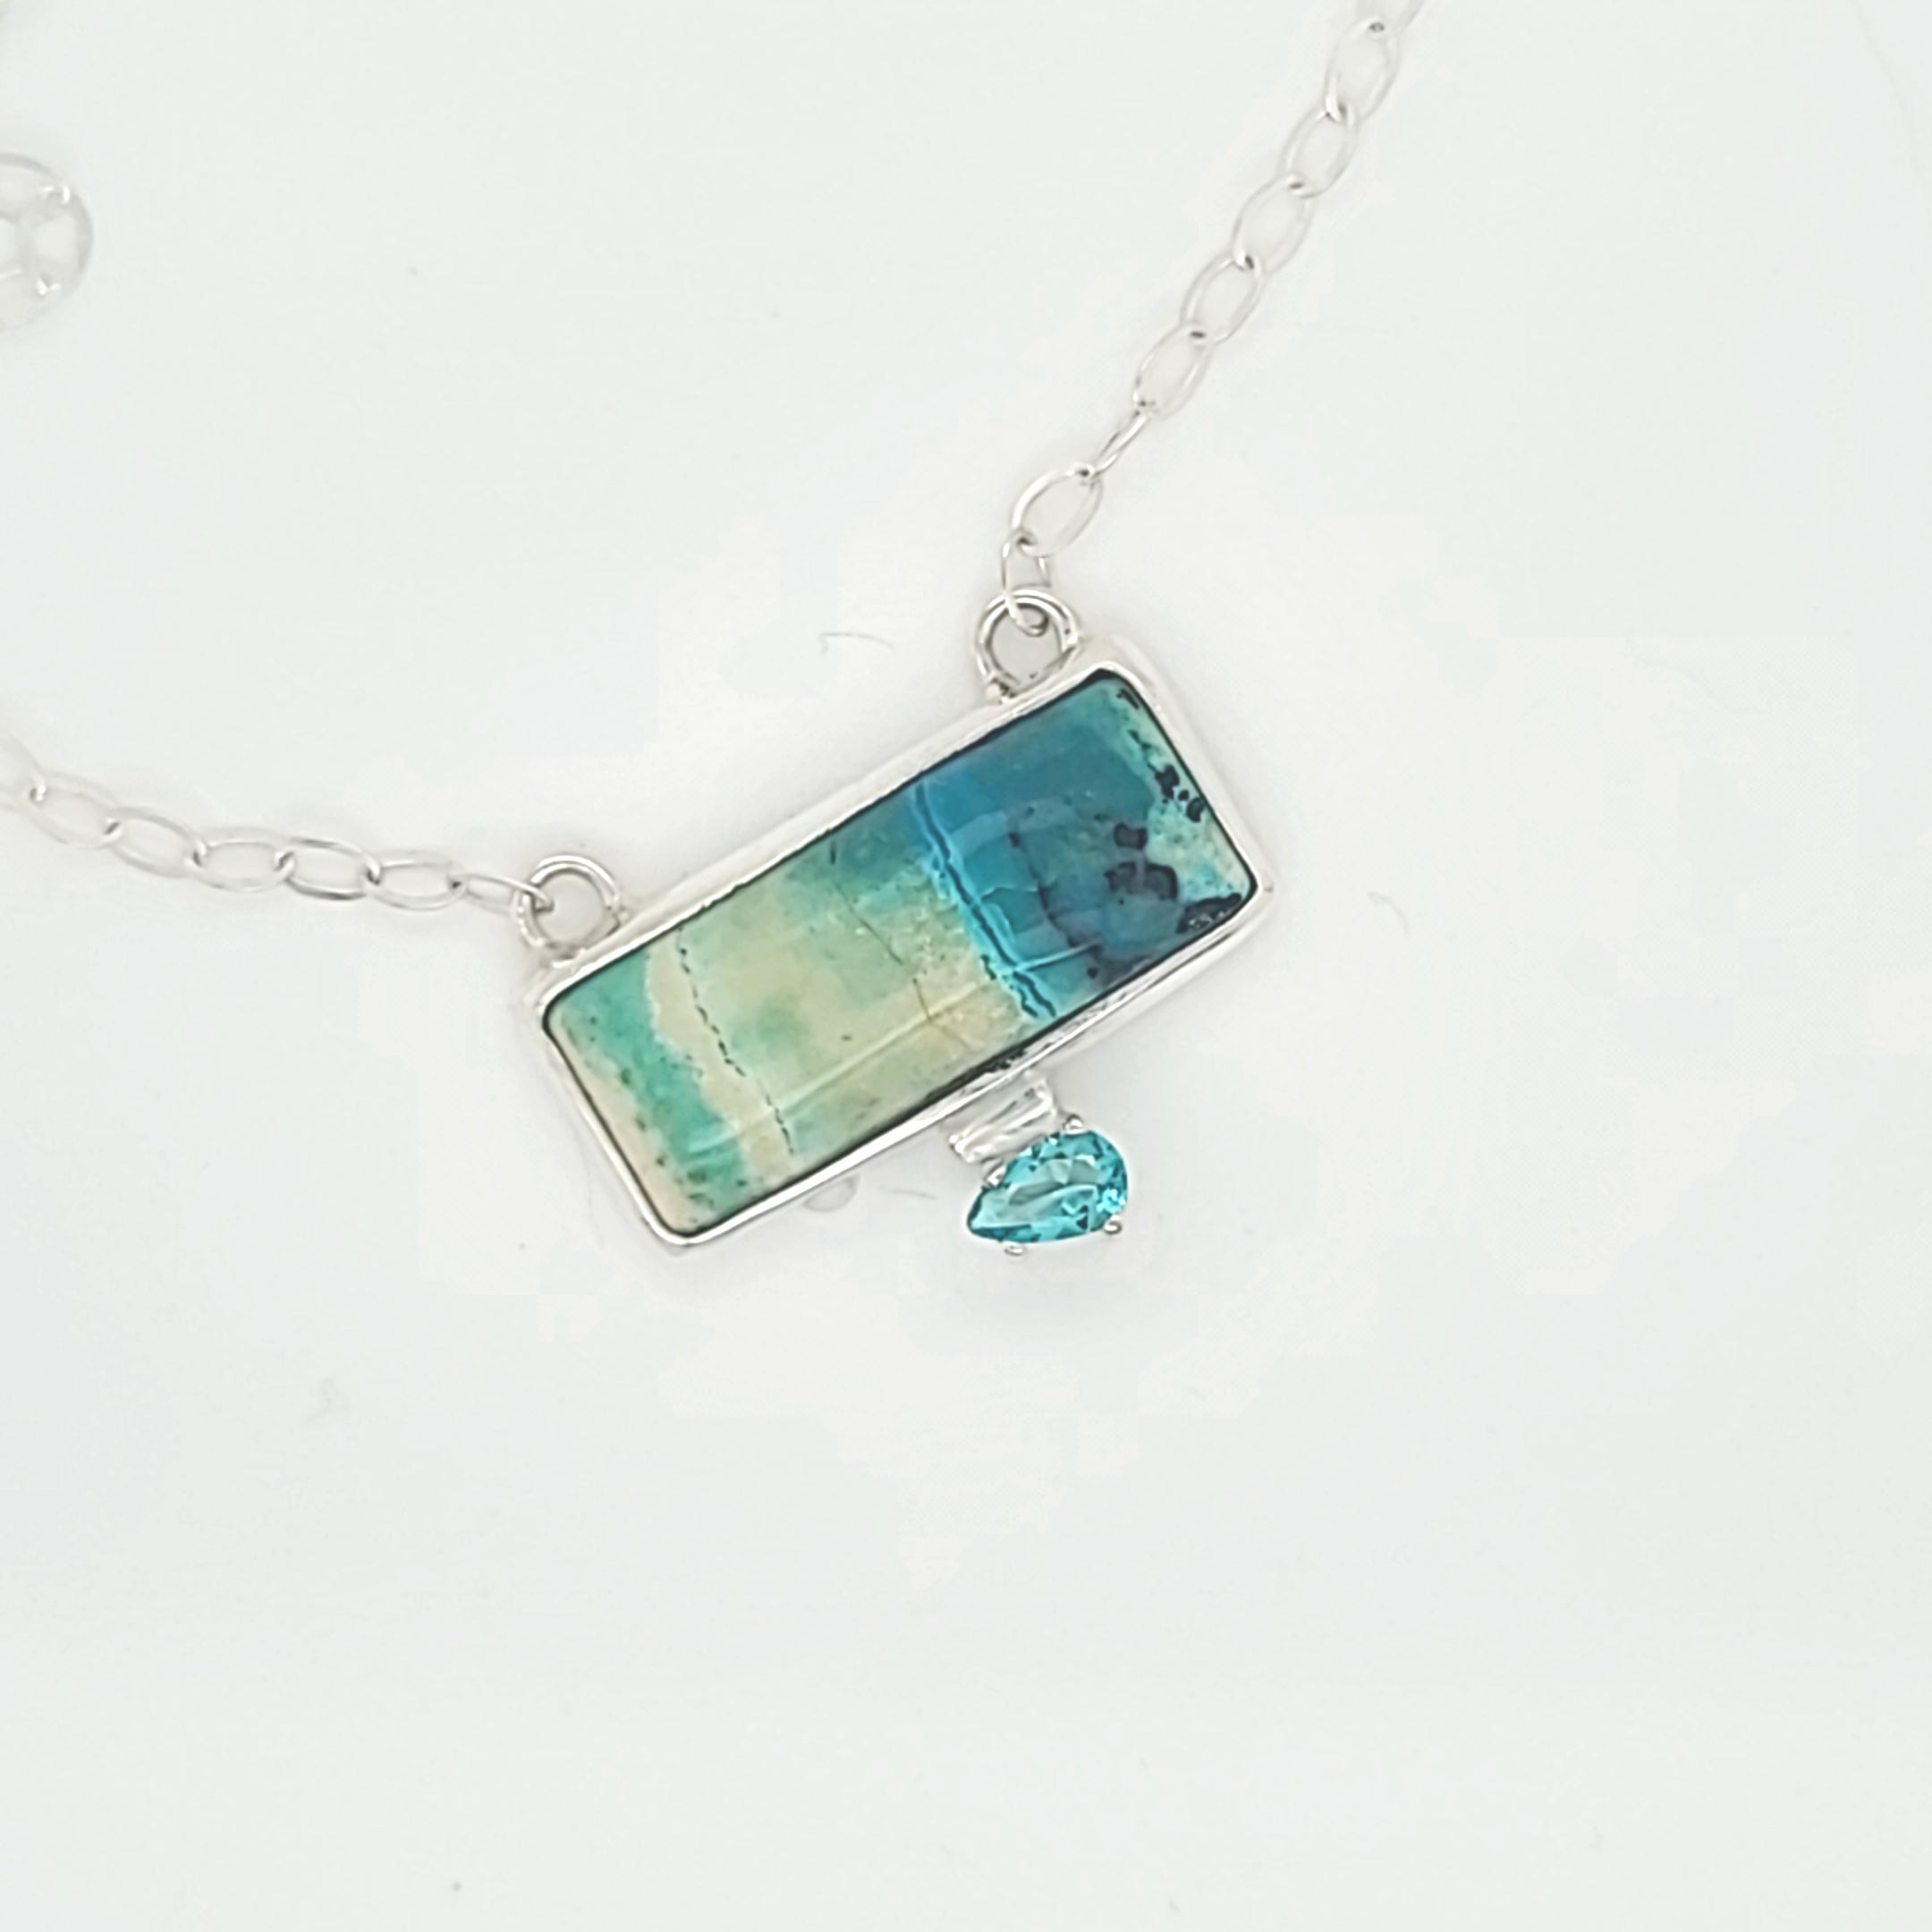 Opalized Wood with Apatite Pendant for Janice